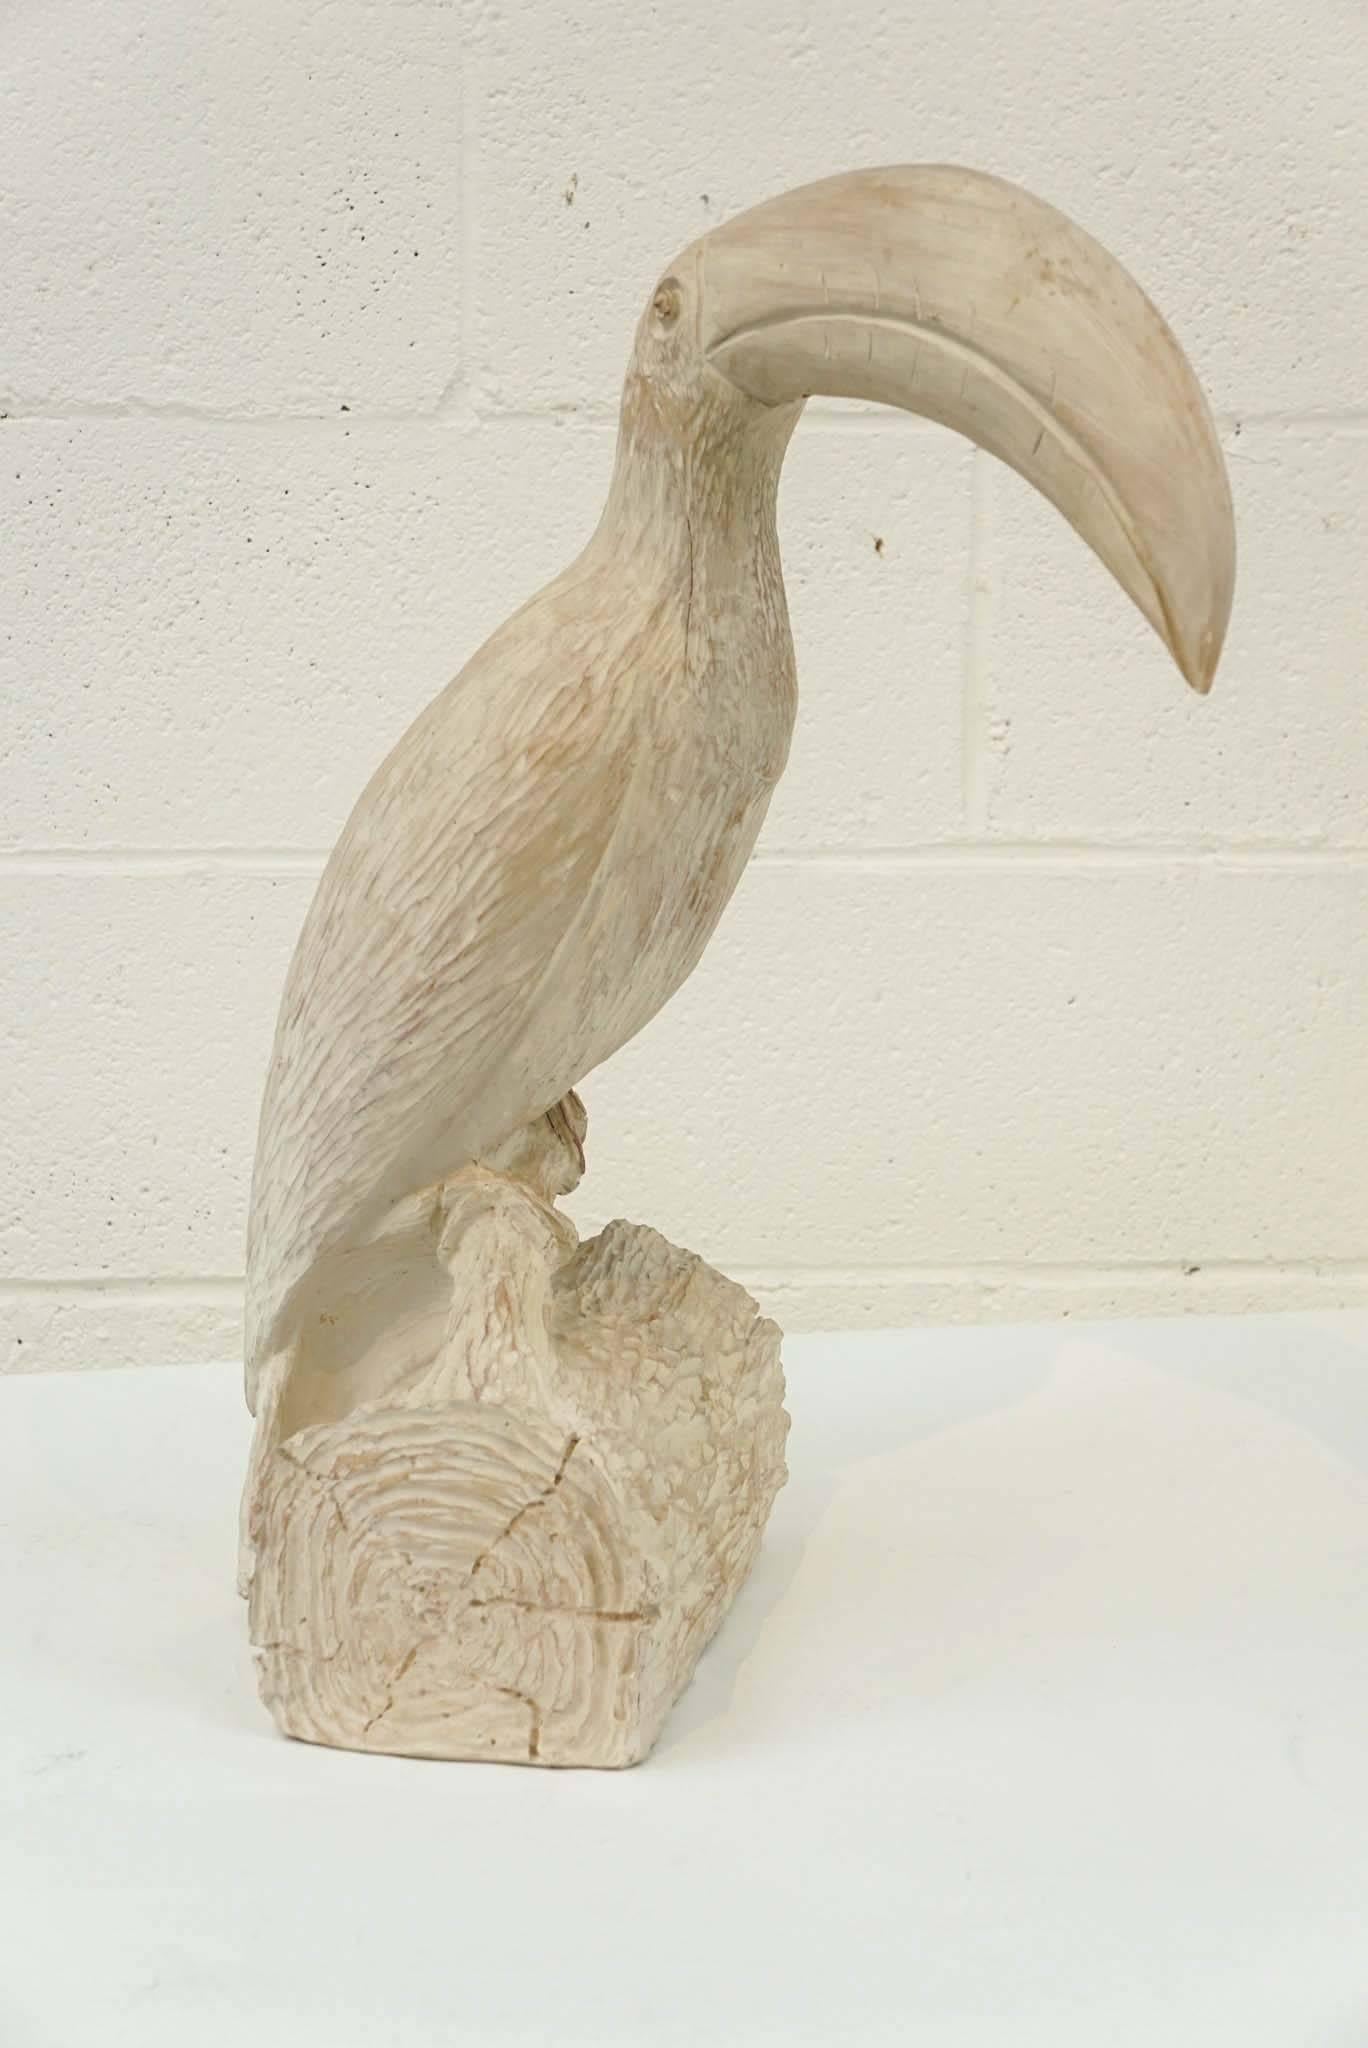 Here is a great toucan sculpture sitting on it's perch. Hand-carved in wood, the stump of wood has a carved faux bois quality.
 